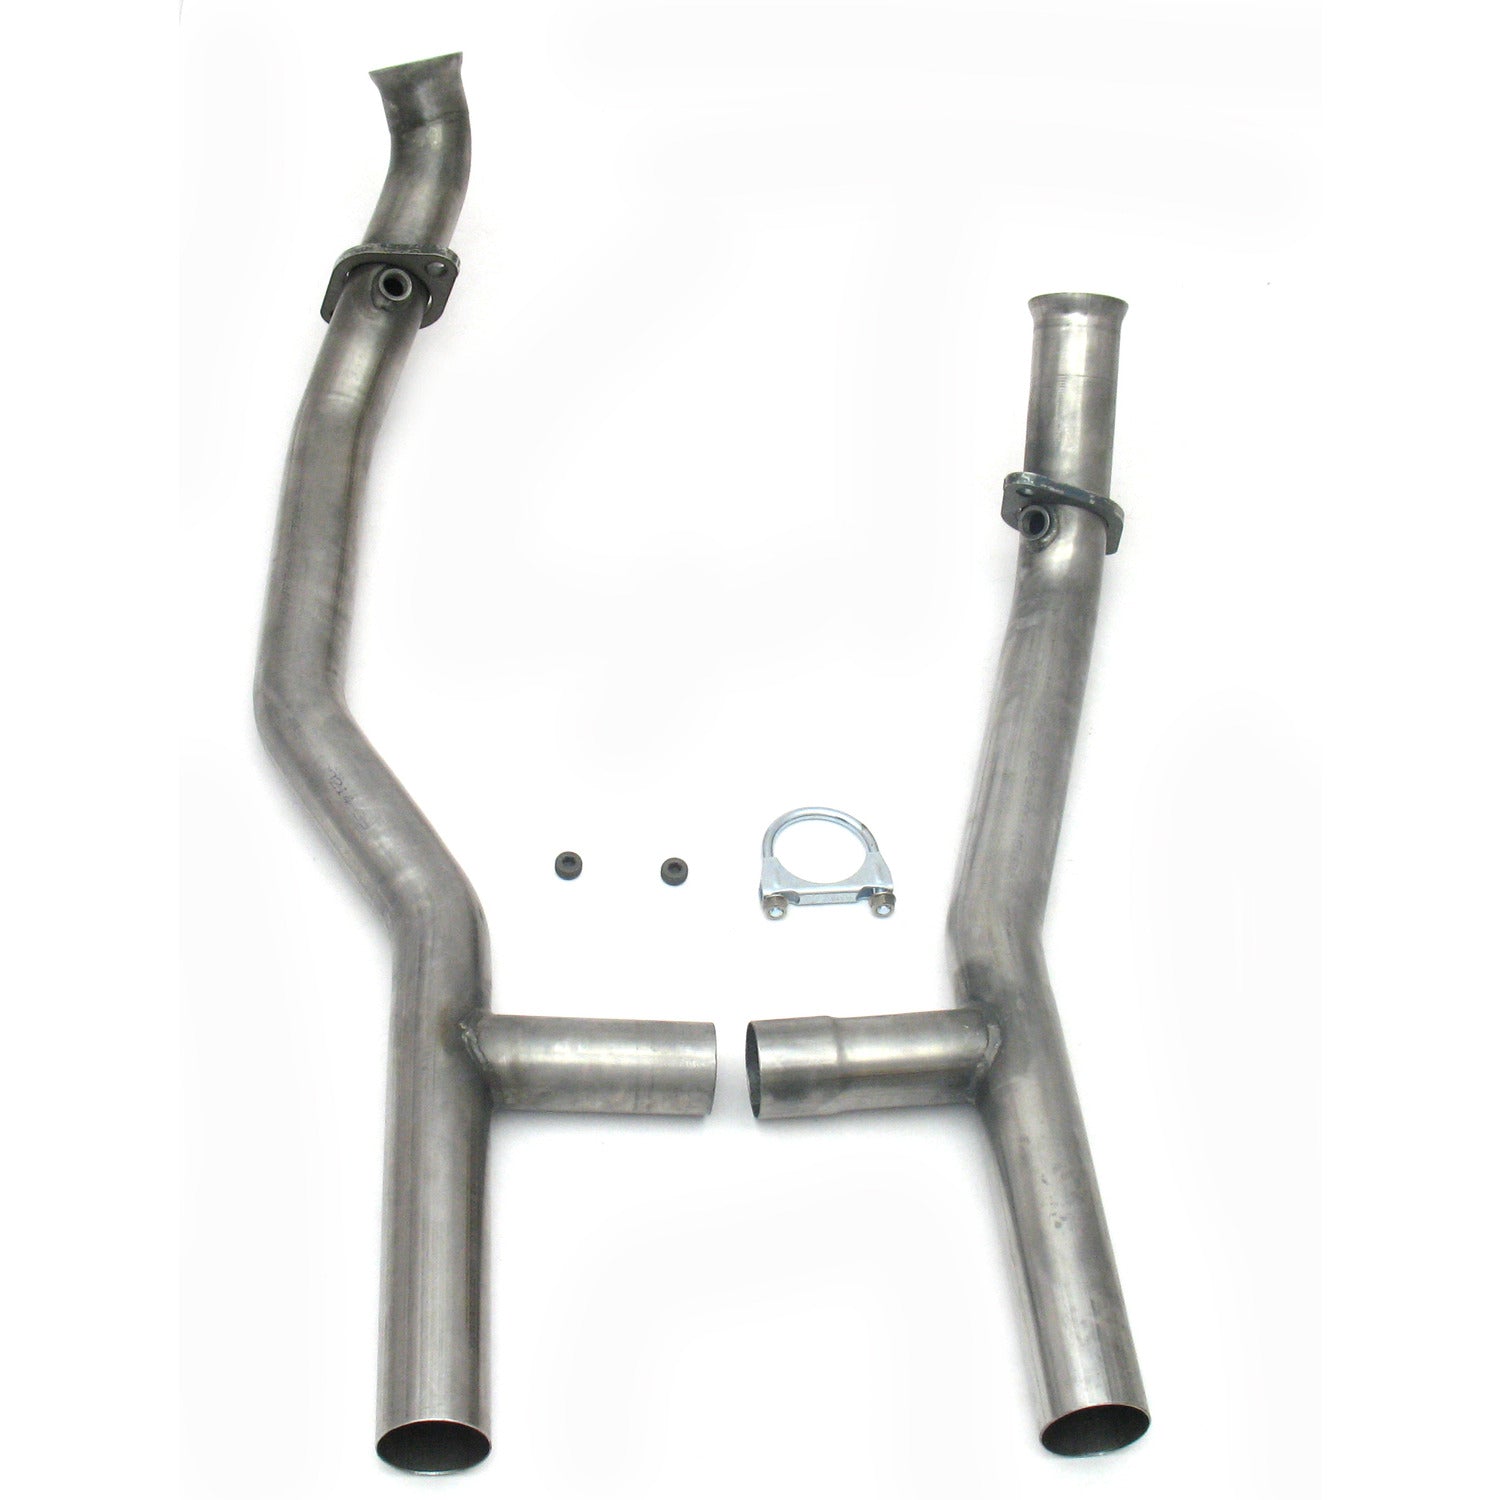 JBA Performance Exhaust 1657SH 2.5" Stainless Steel Mid-Pipe H-Pipe for 1653, 351W AOD Transmission